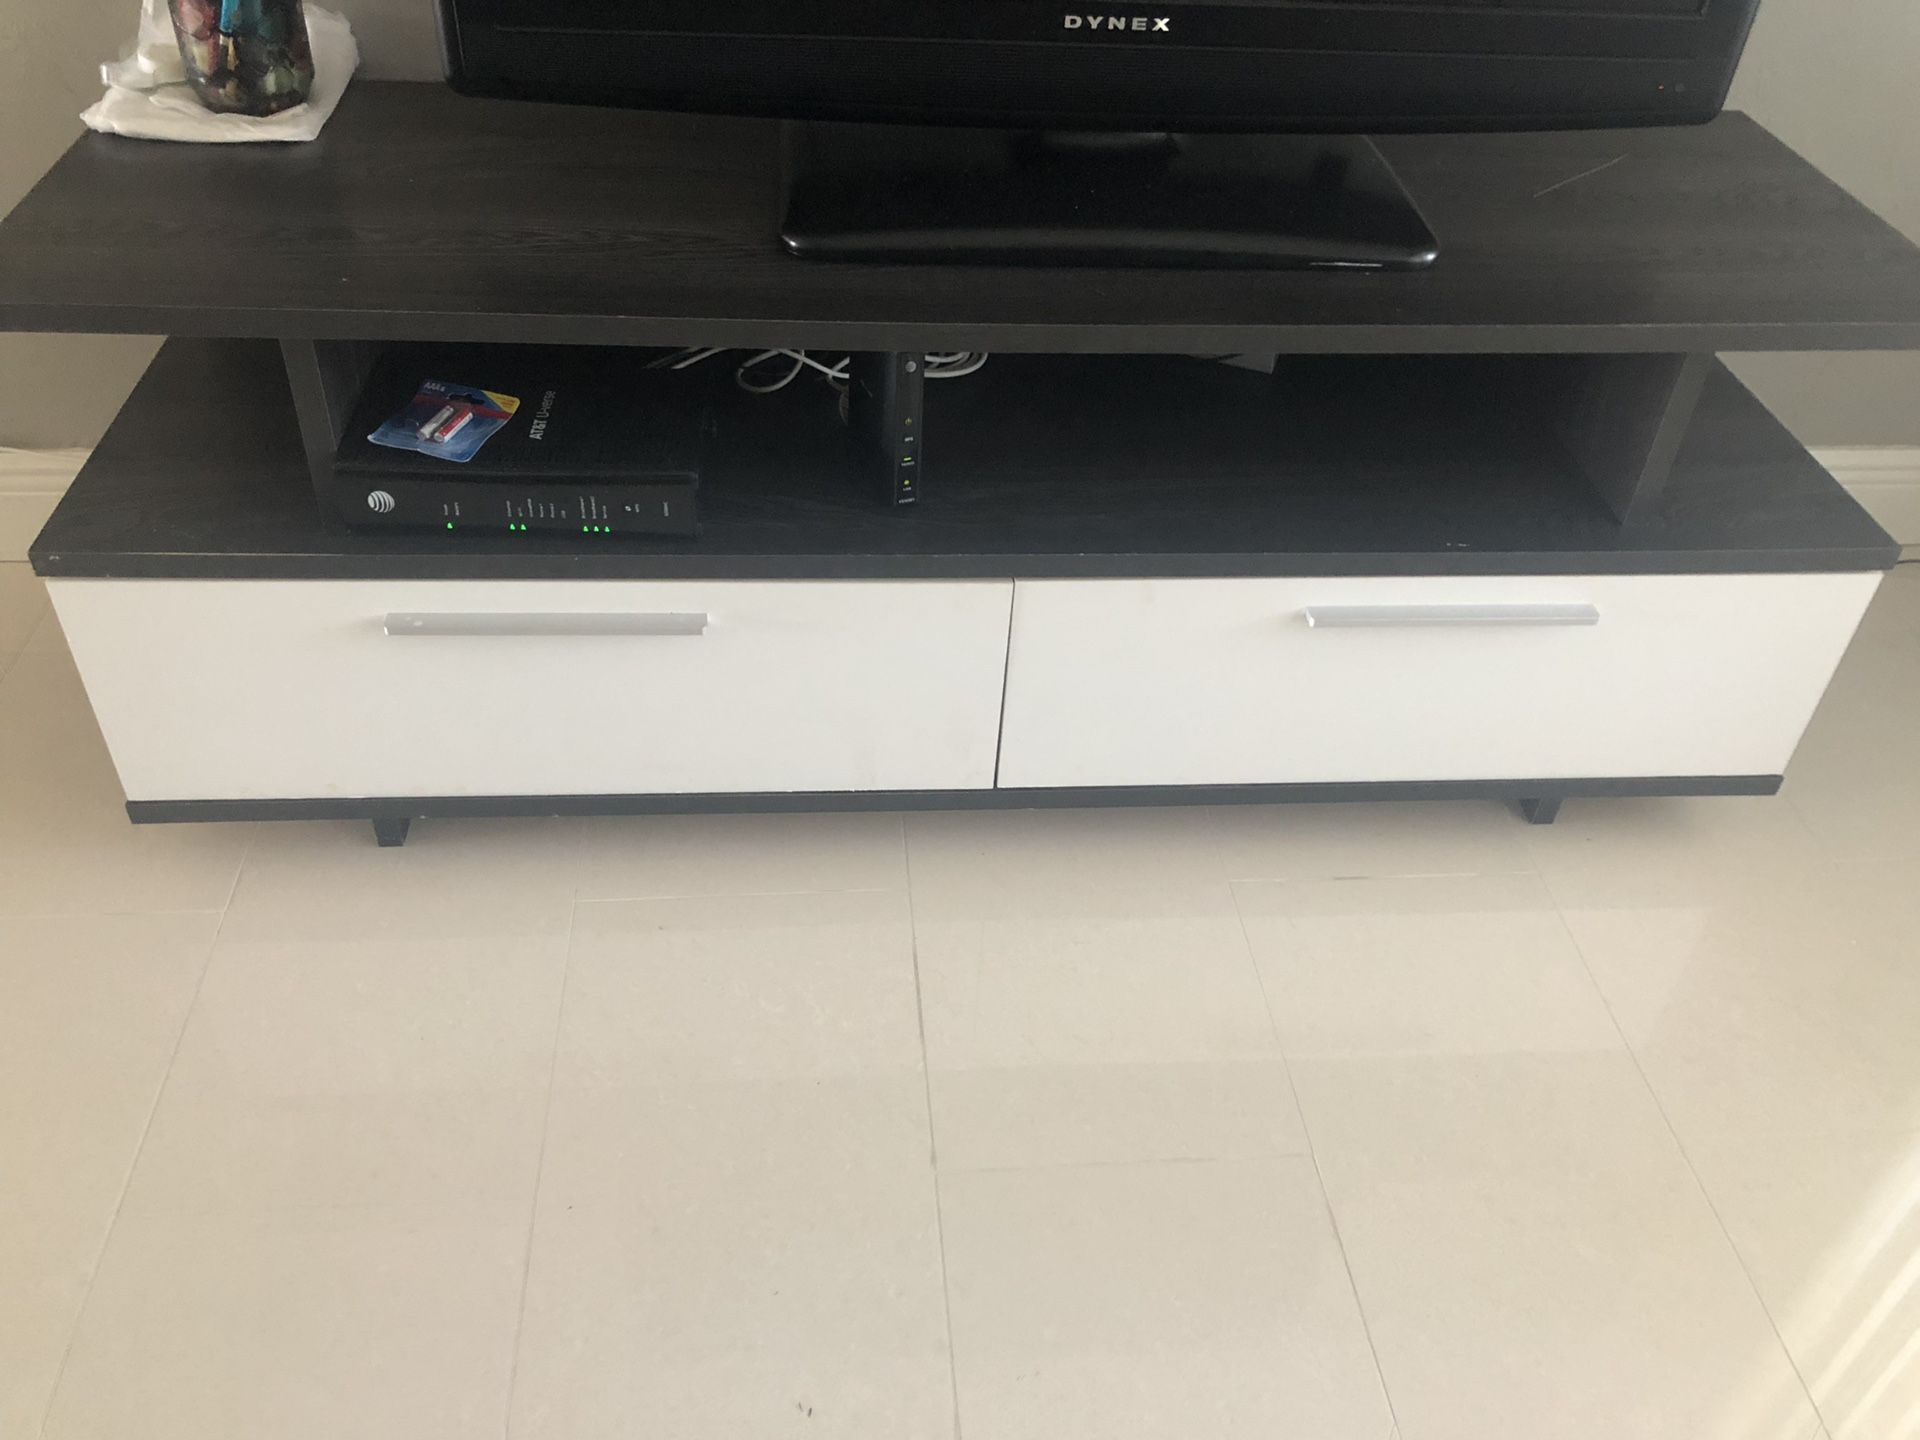 Entertainment/TV stand